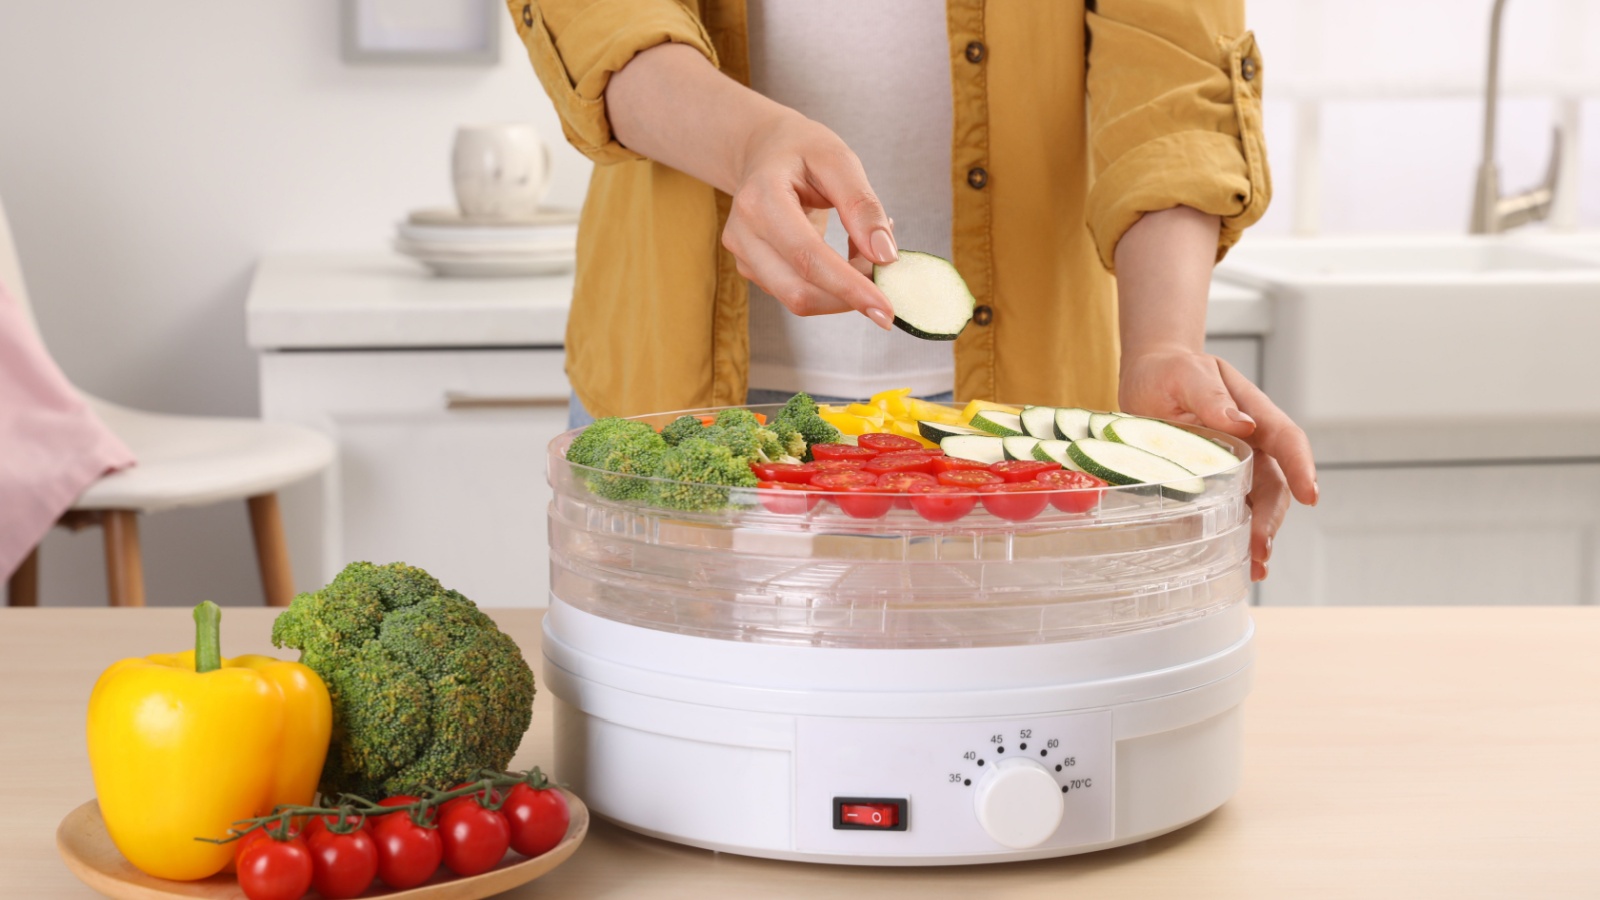 Woman putting cut zucchini into fruit dehydrator machine at wooden table in kitchen